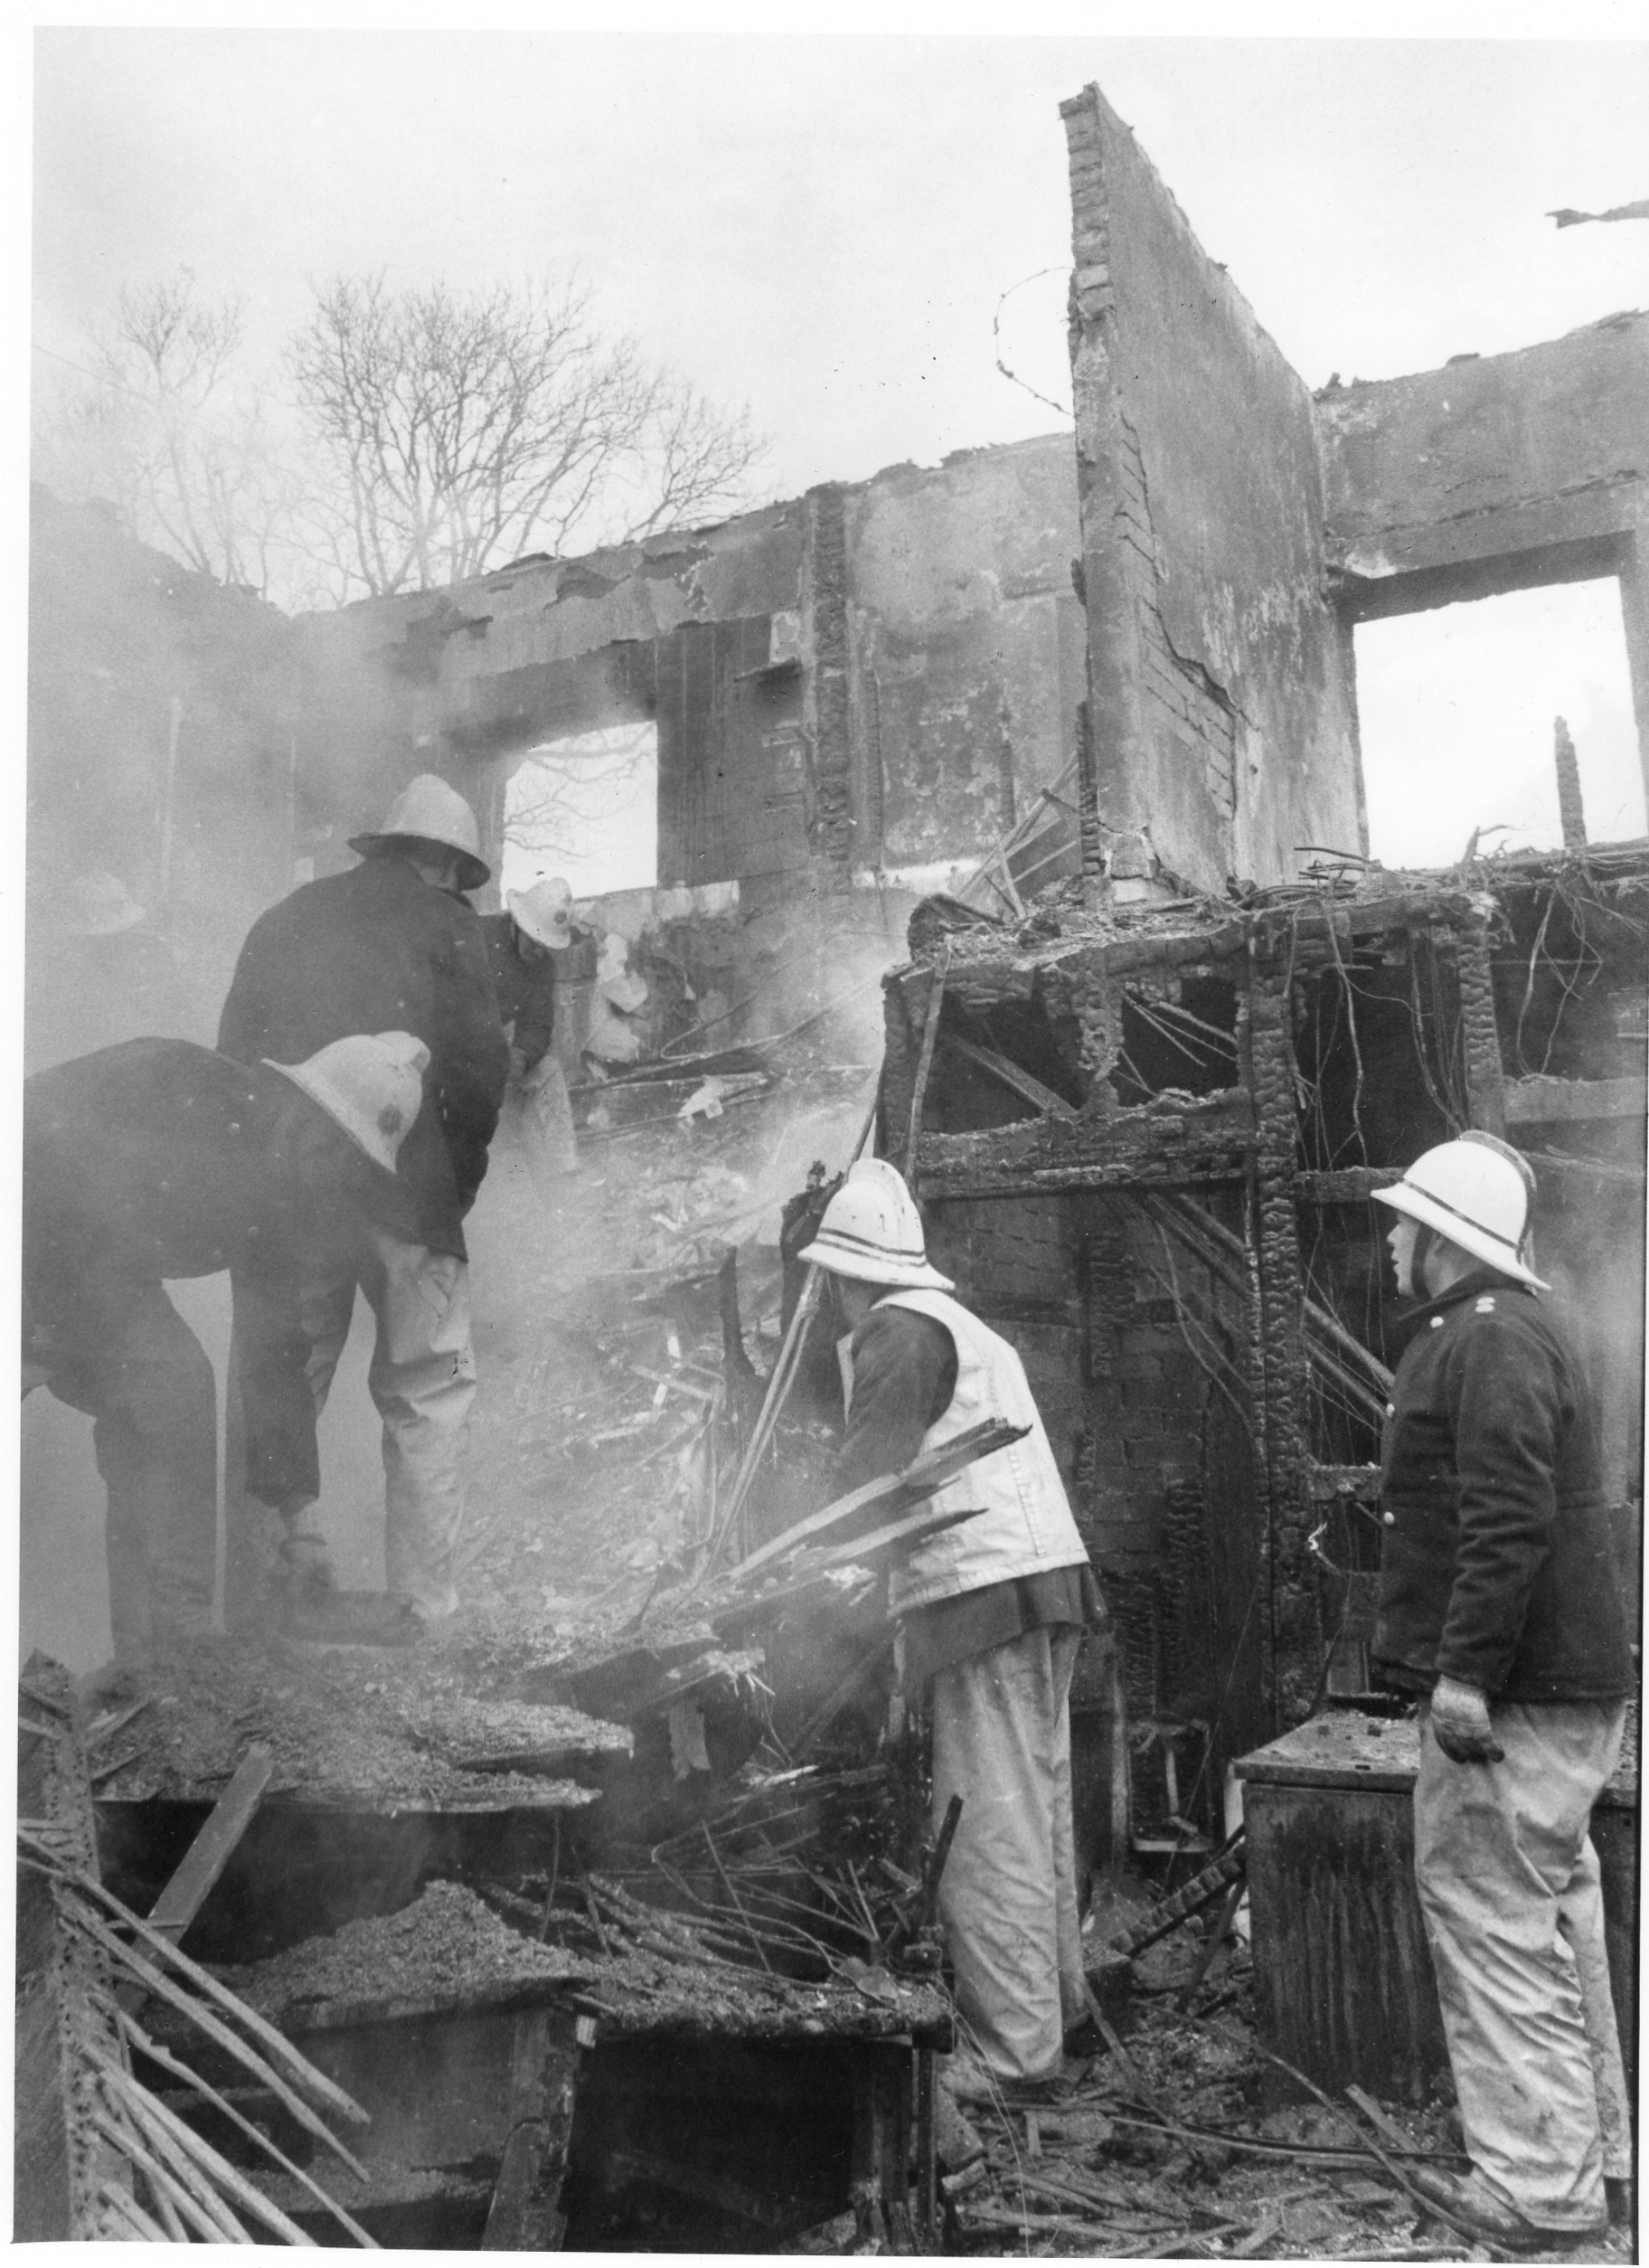 Fire Damage to the Coach House Motel, Lewdown, December 20th, 1981. Photo courtesy of Gary Chapman.